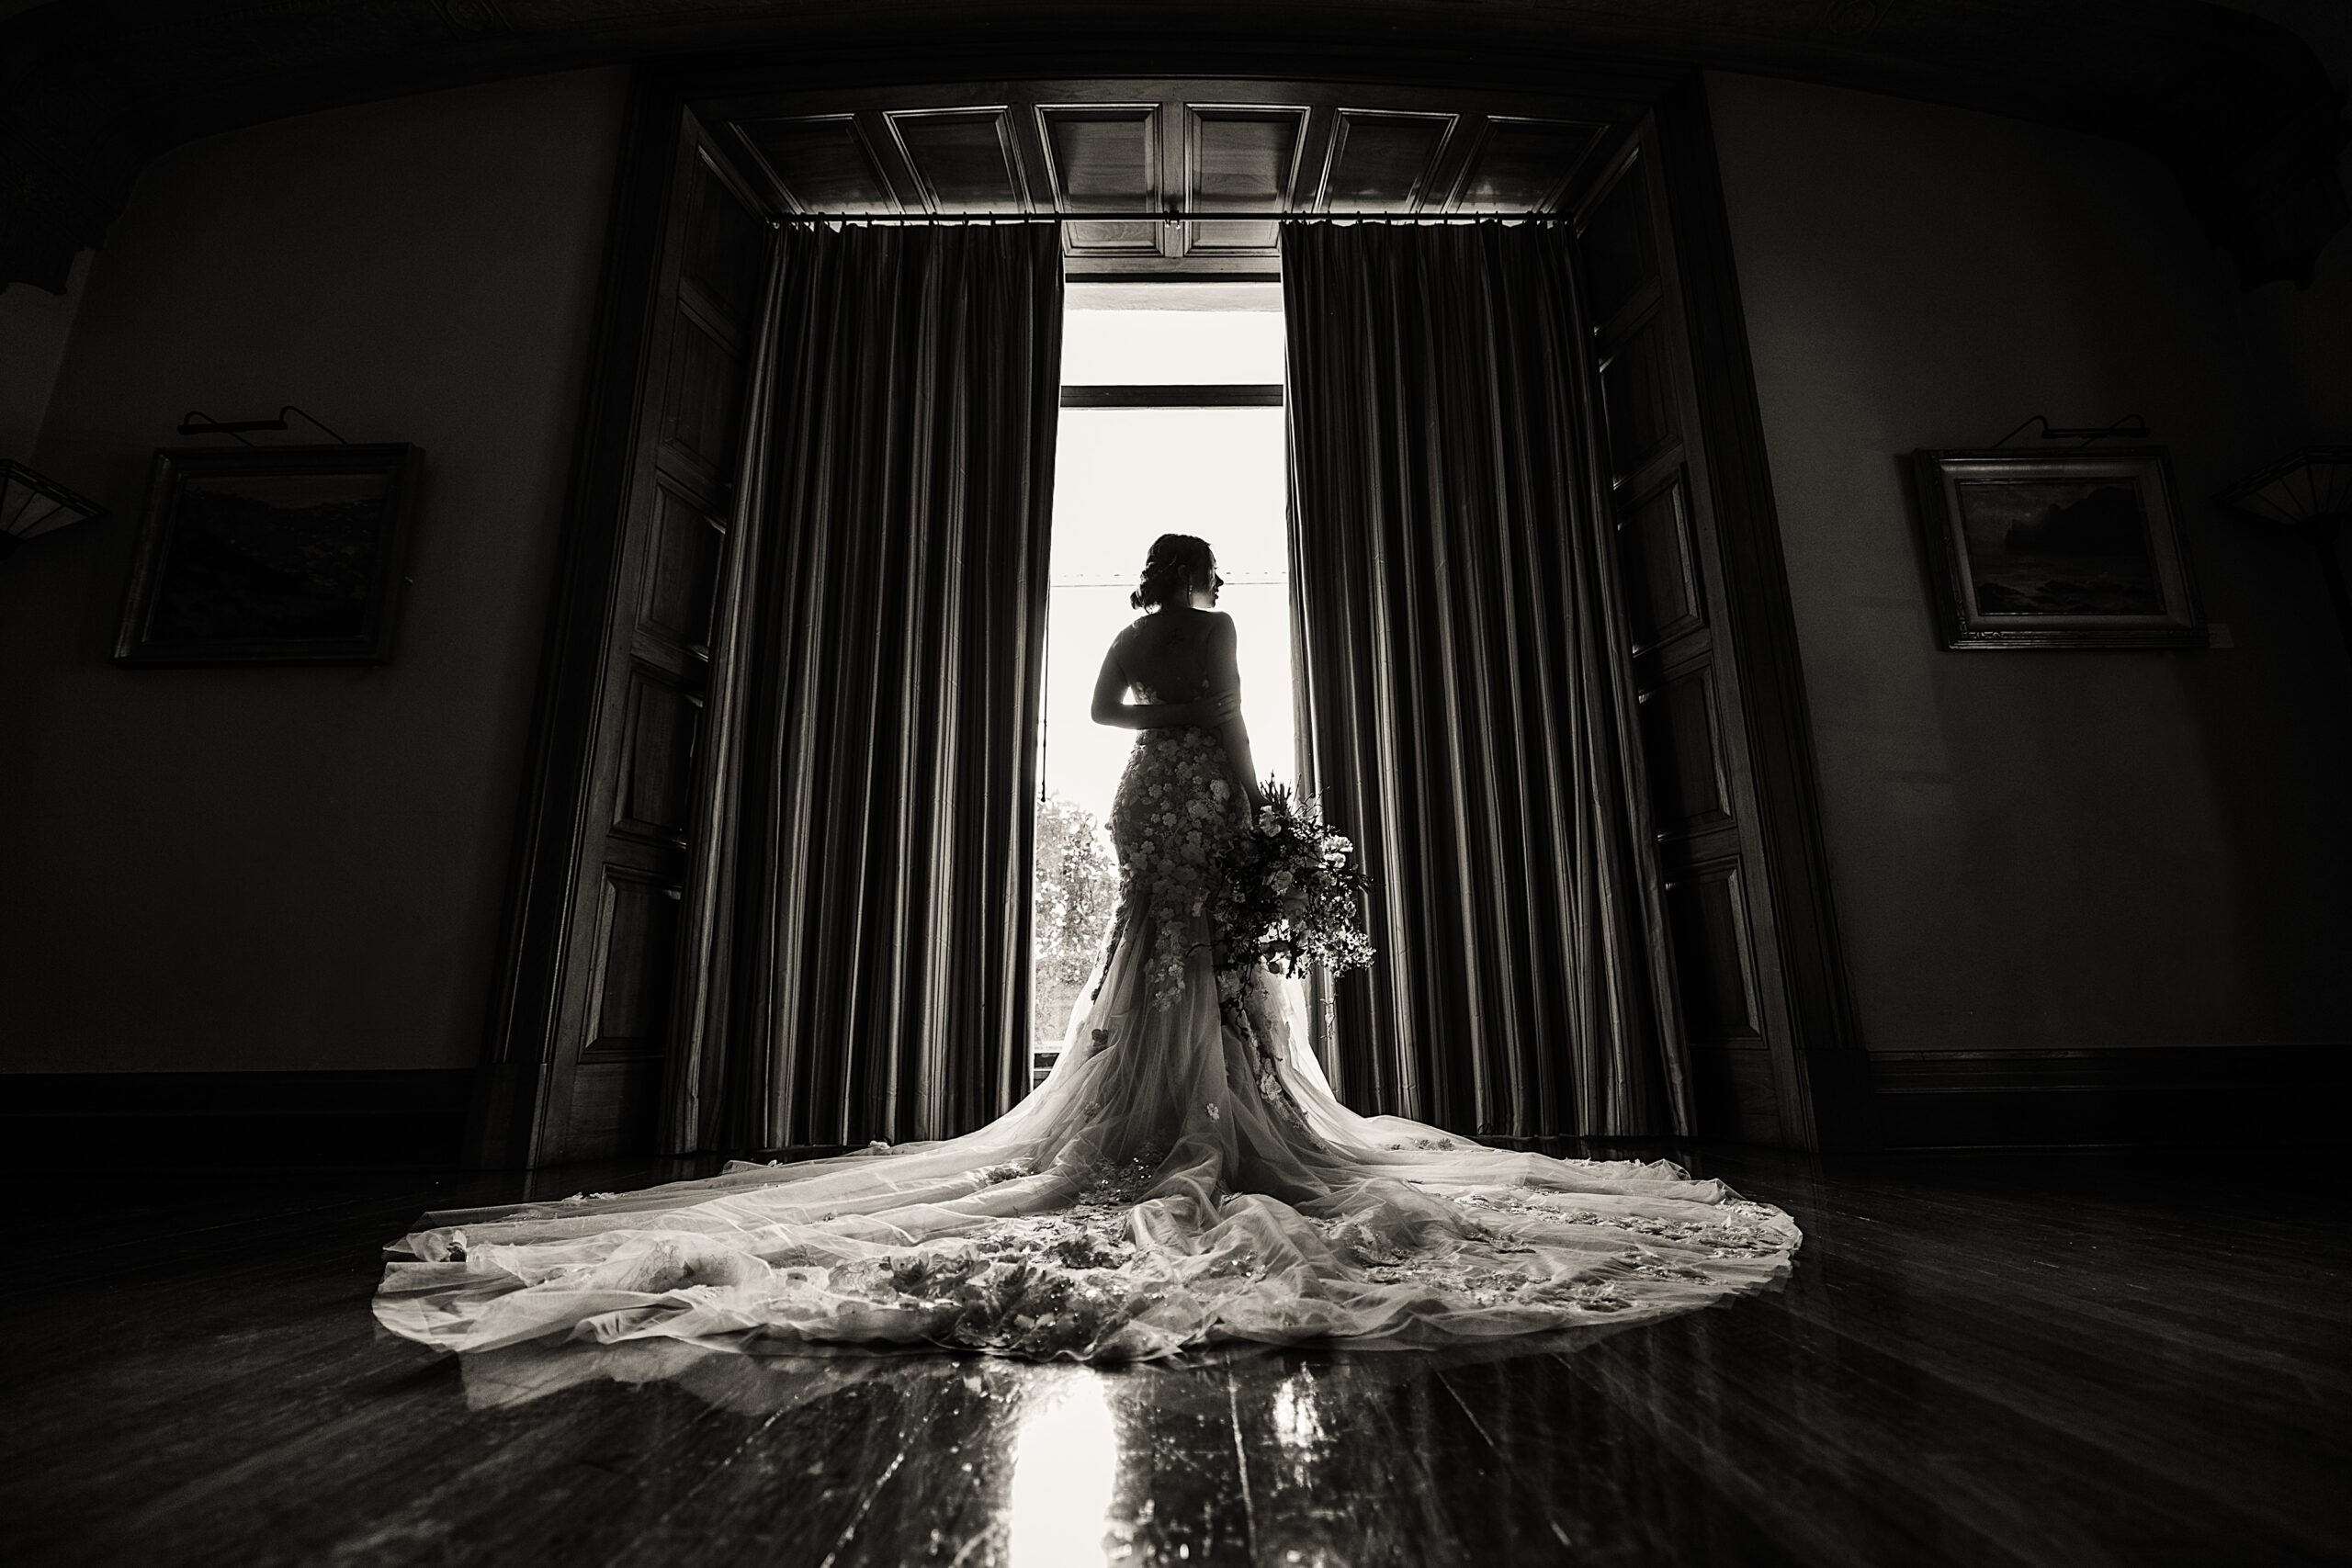 Editorial image of a bride at a window inside of maxwell house pasadena